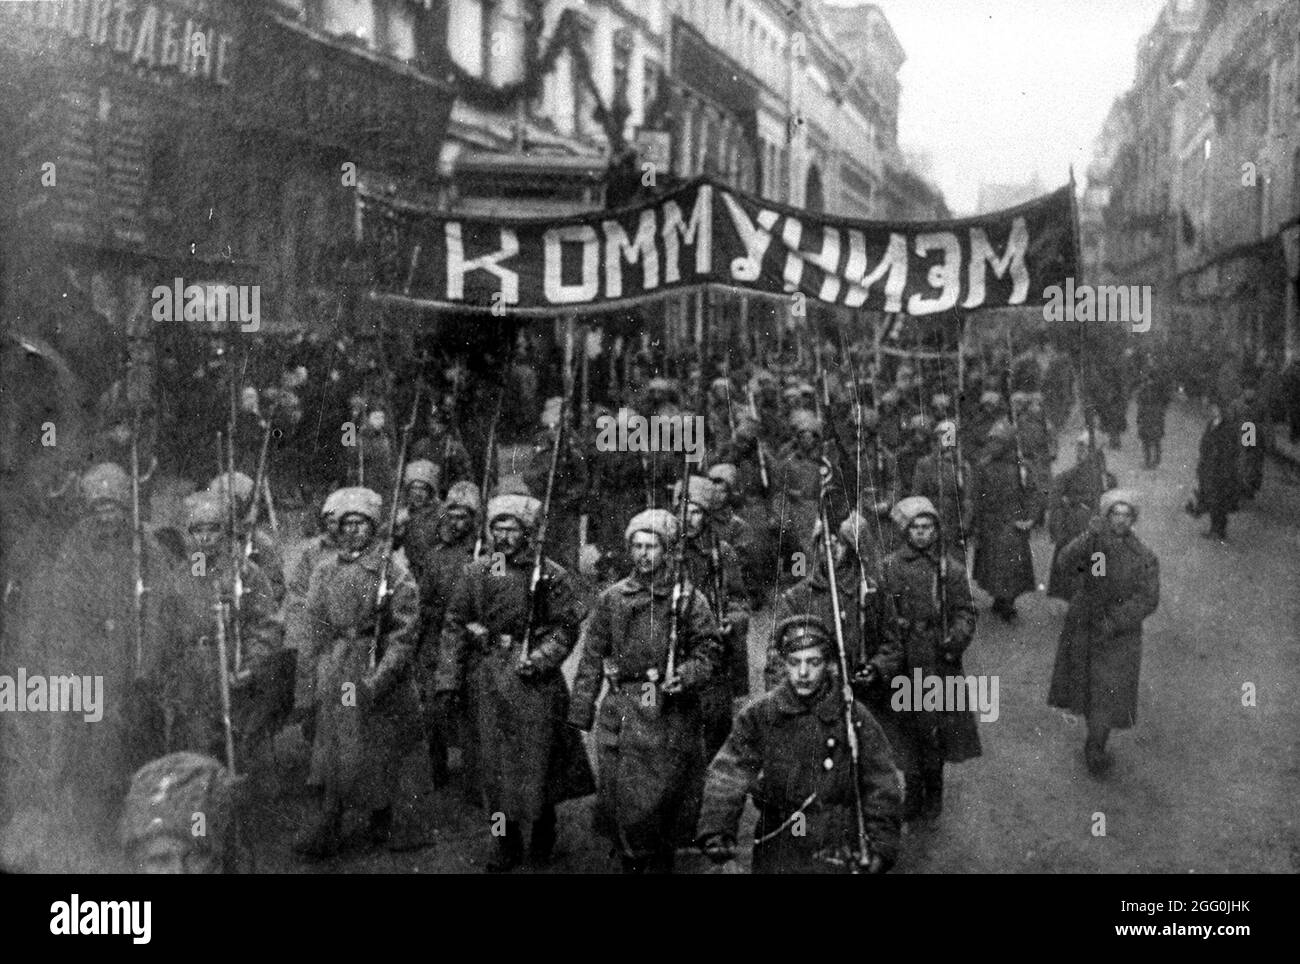 Protesters communist Black and White Stock Photos & Images - Alamy